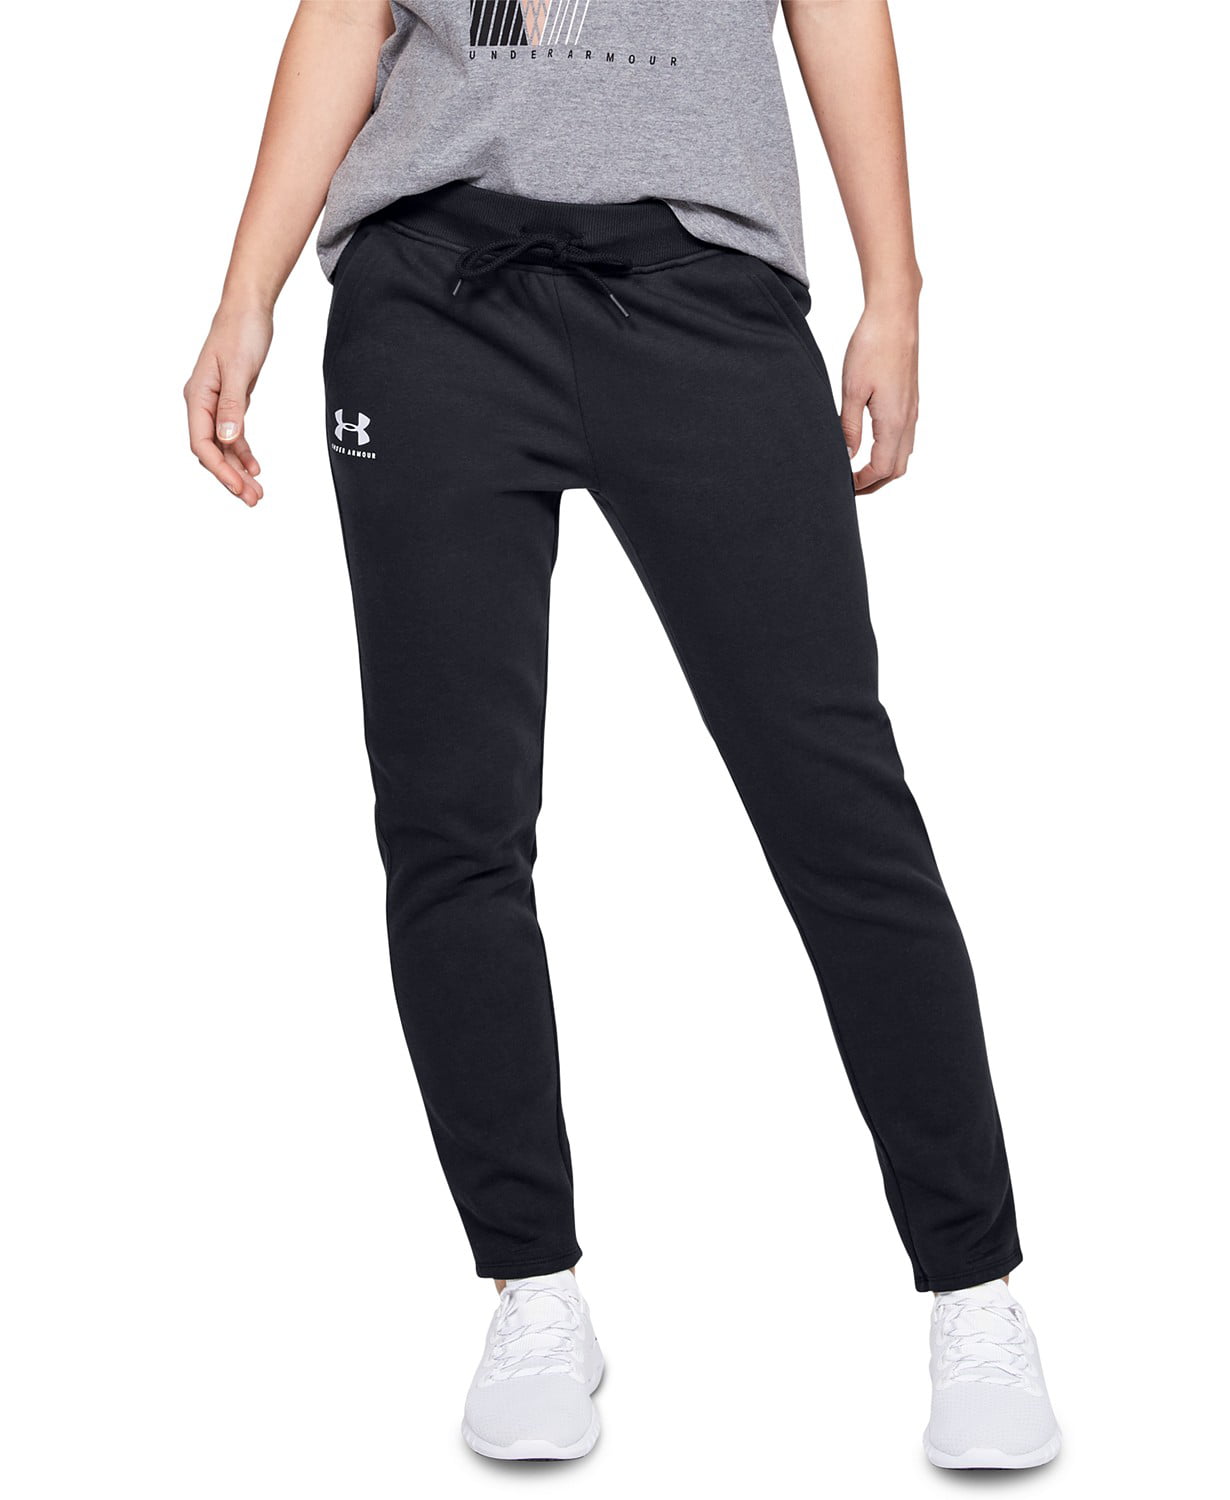 Under Armour Rival Fleece Womens Joggers Black Loose Fit Soft Gym Training Pants 